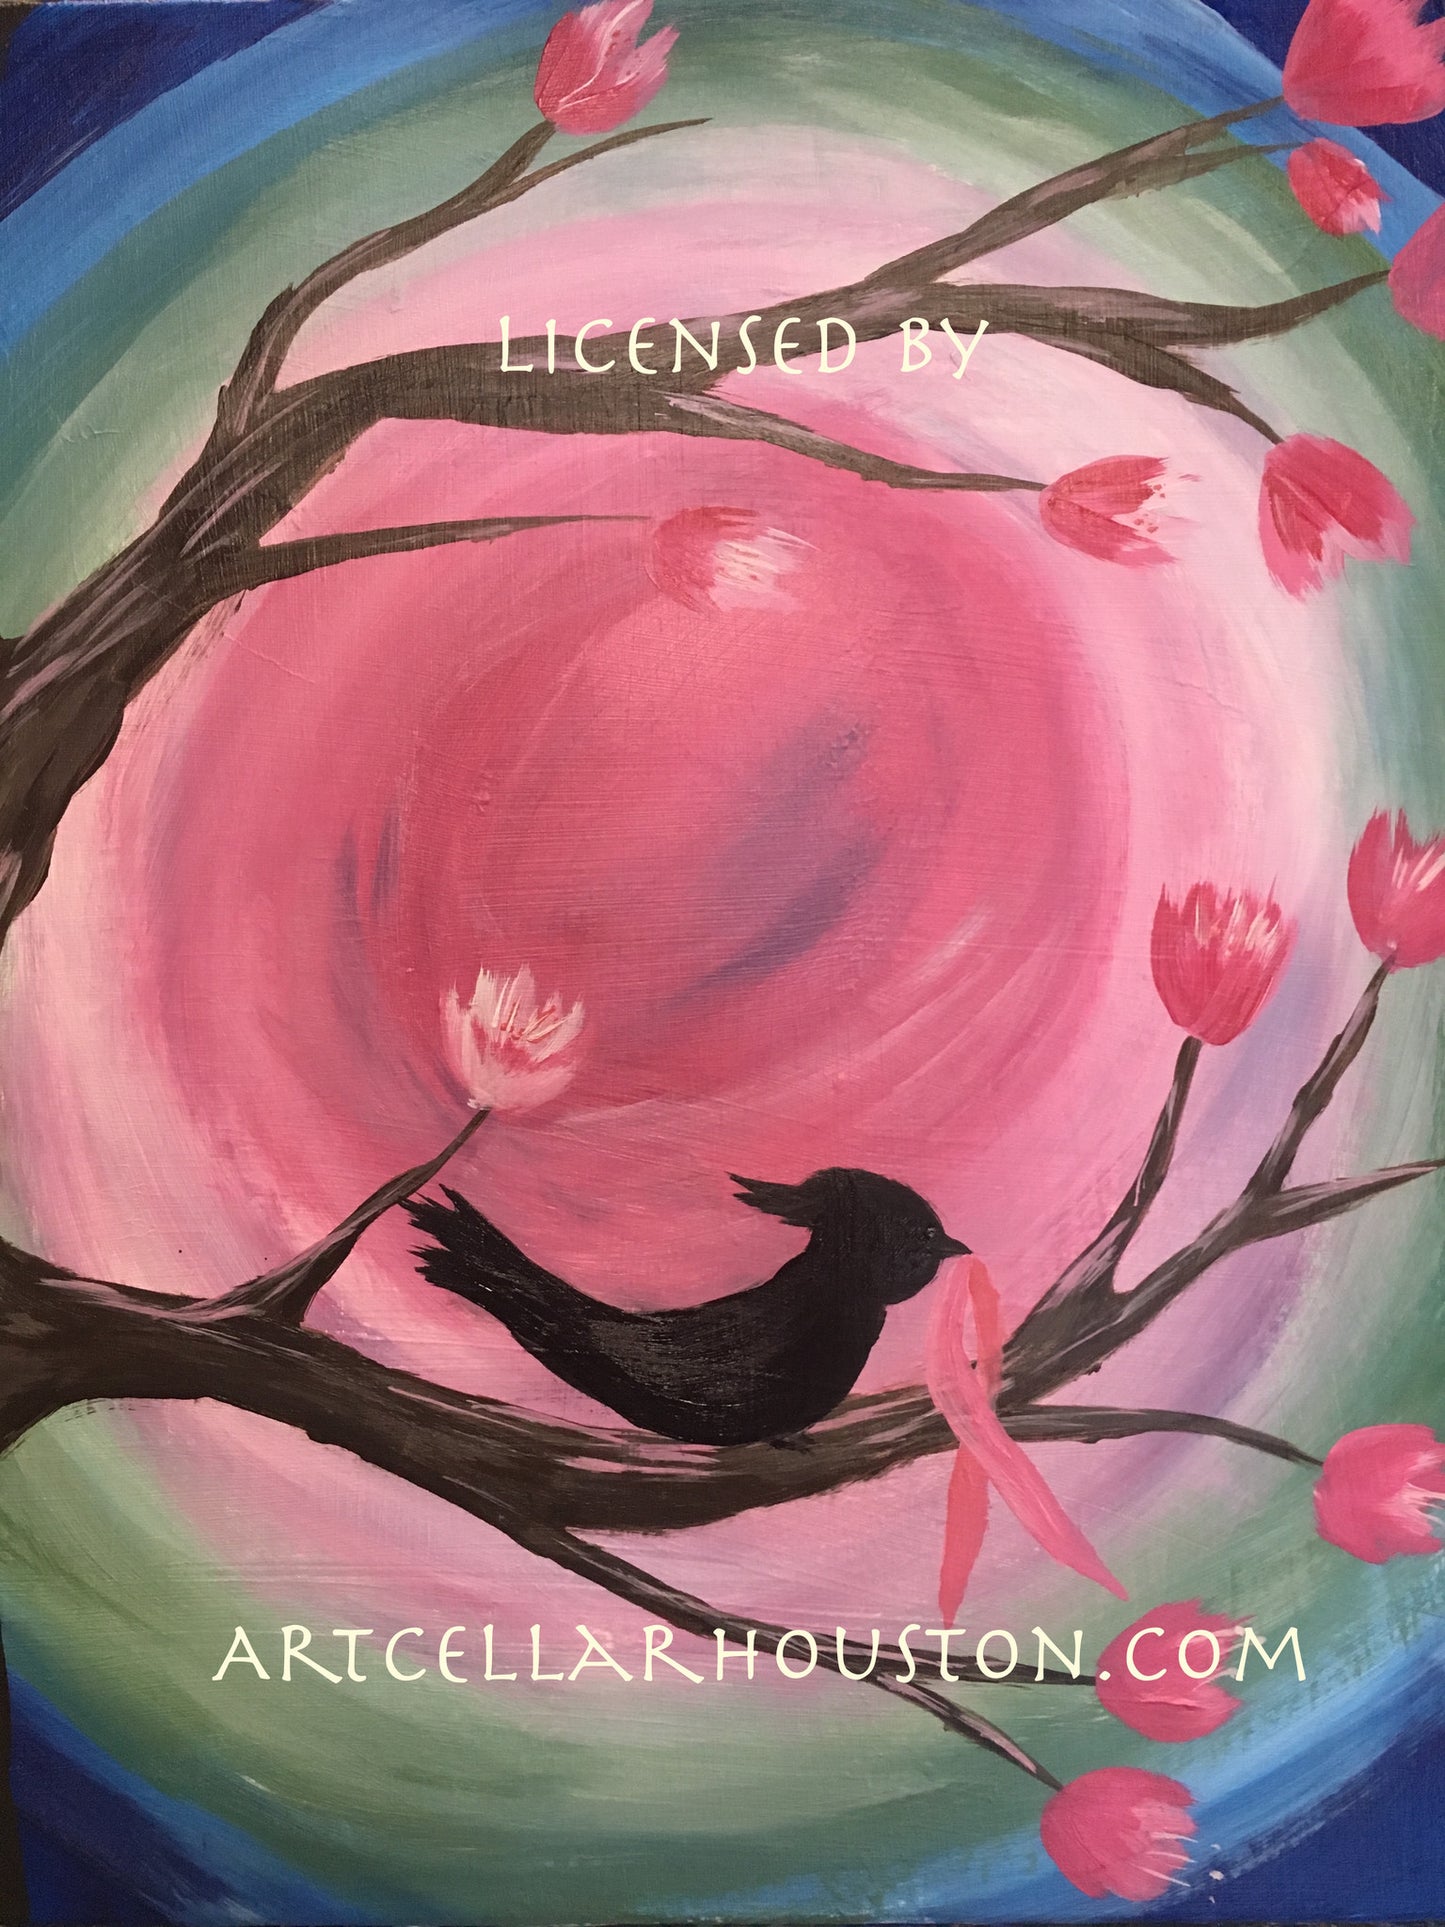 Sat, Jul 28, 1-4pm “Family Tree” PRIVATE Houston Painting Party